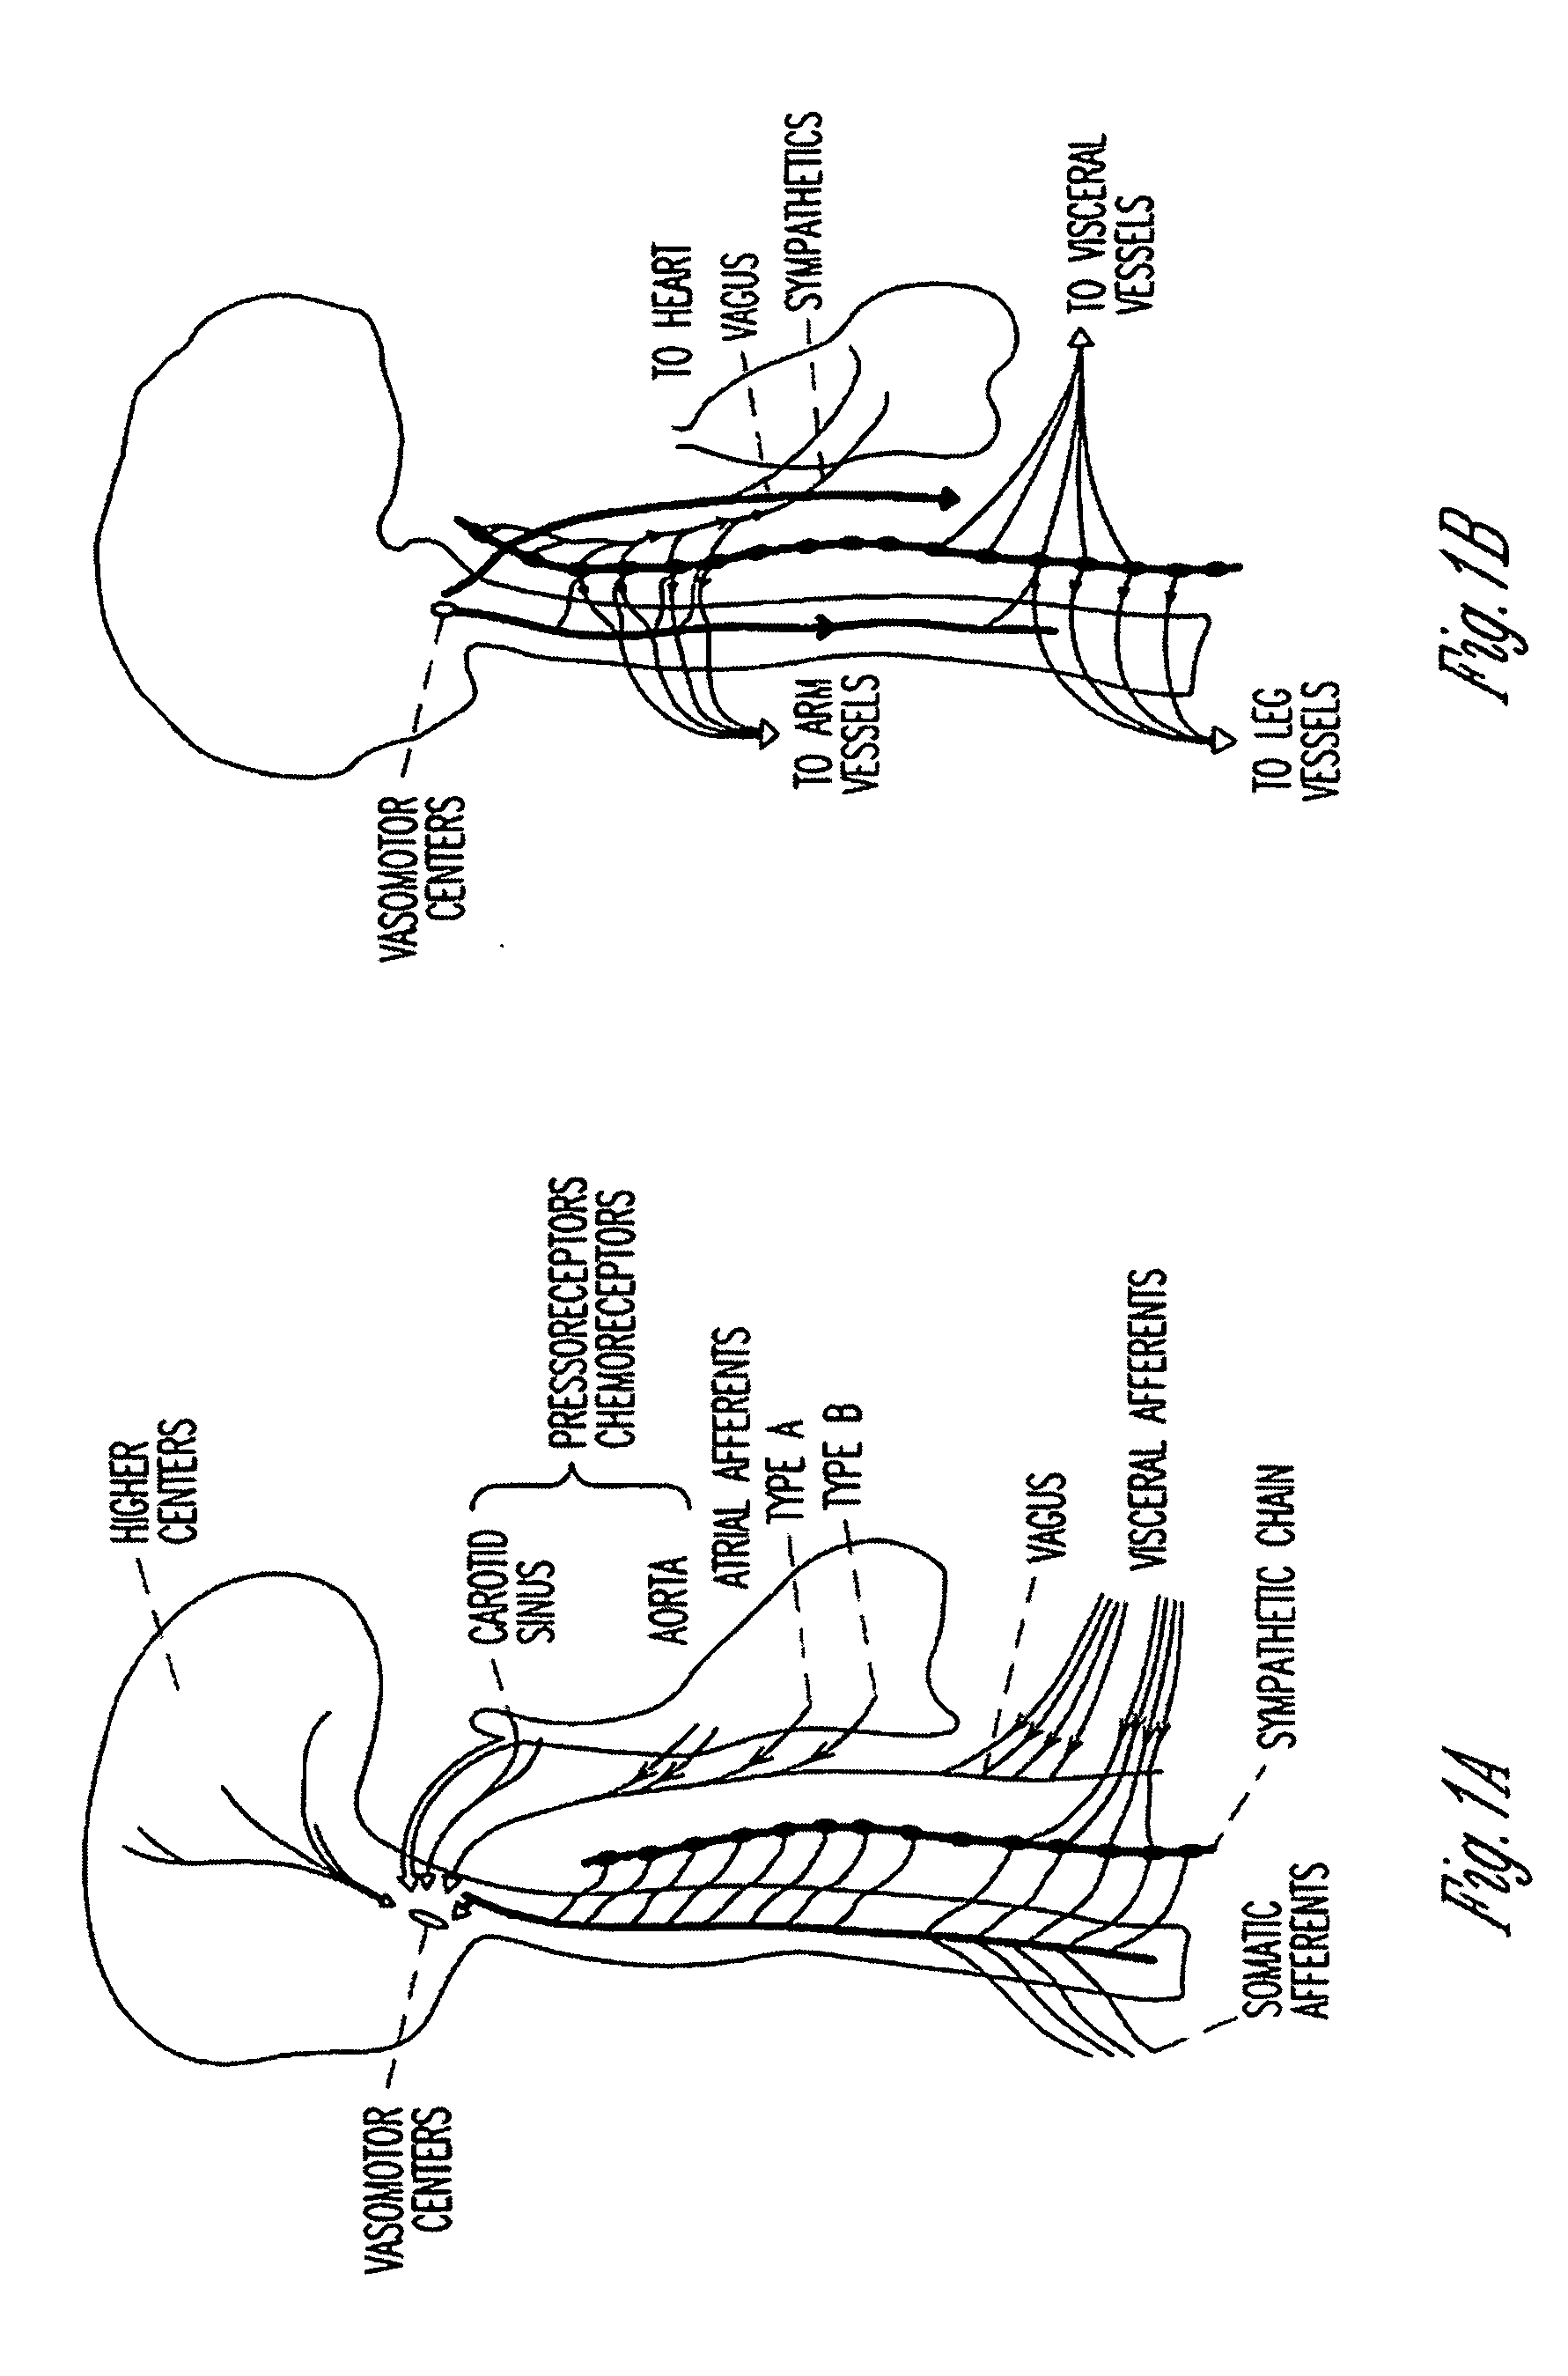 Coordinated therapy for disordered breathing including baroreflex modulation